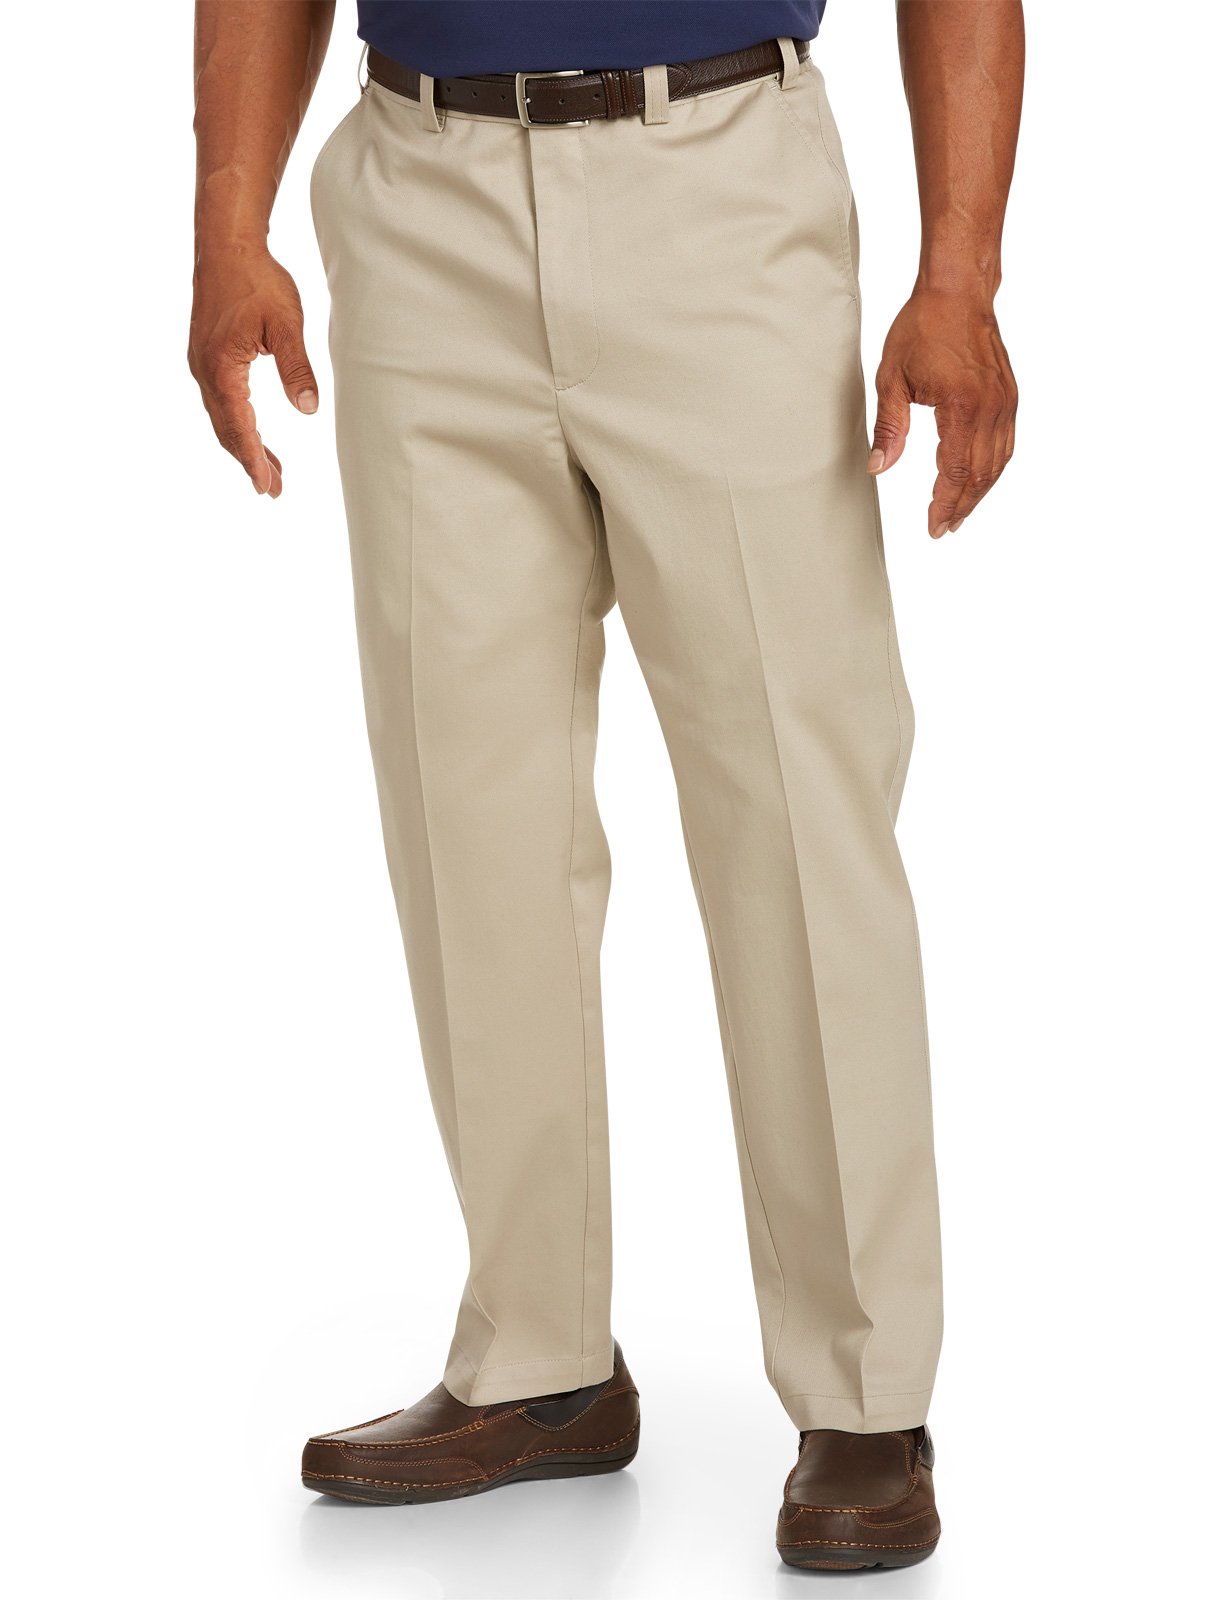 Oak Hill Men's Big and Tall Straight-Fit Premium Pants with Stretch